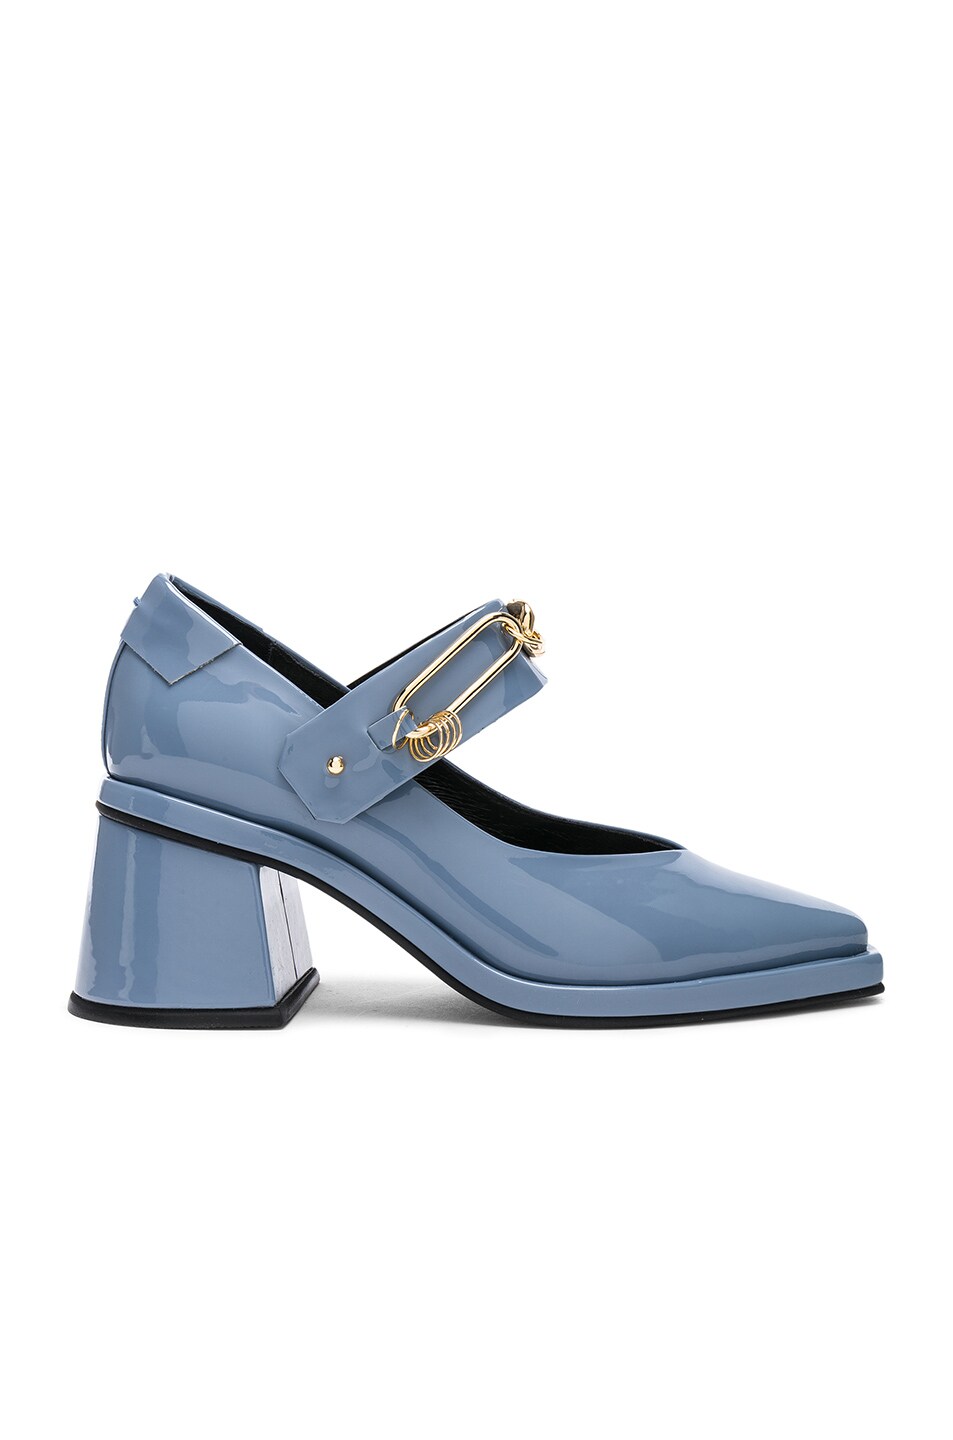 Image 1 of Reike Nen Patent Leather Square Chain Heels in Sky Blue